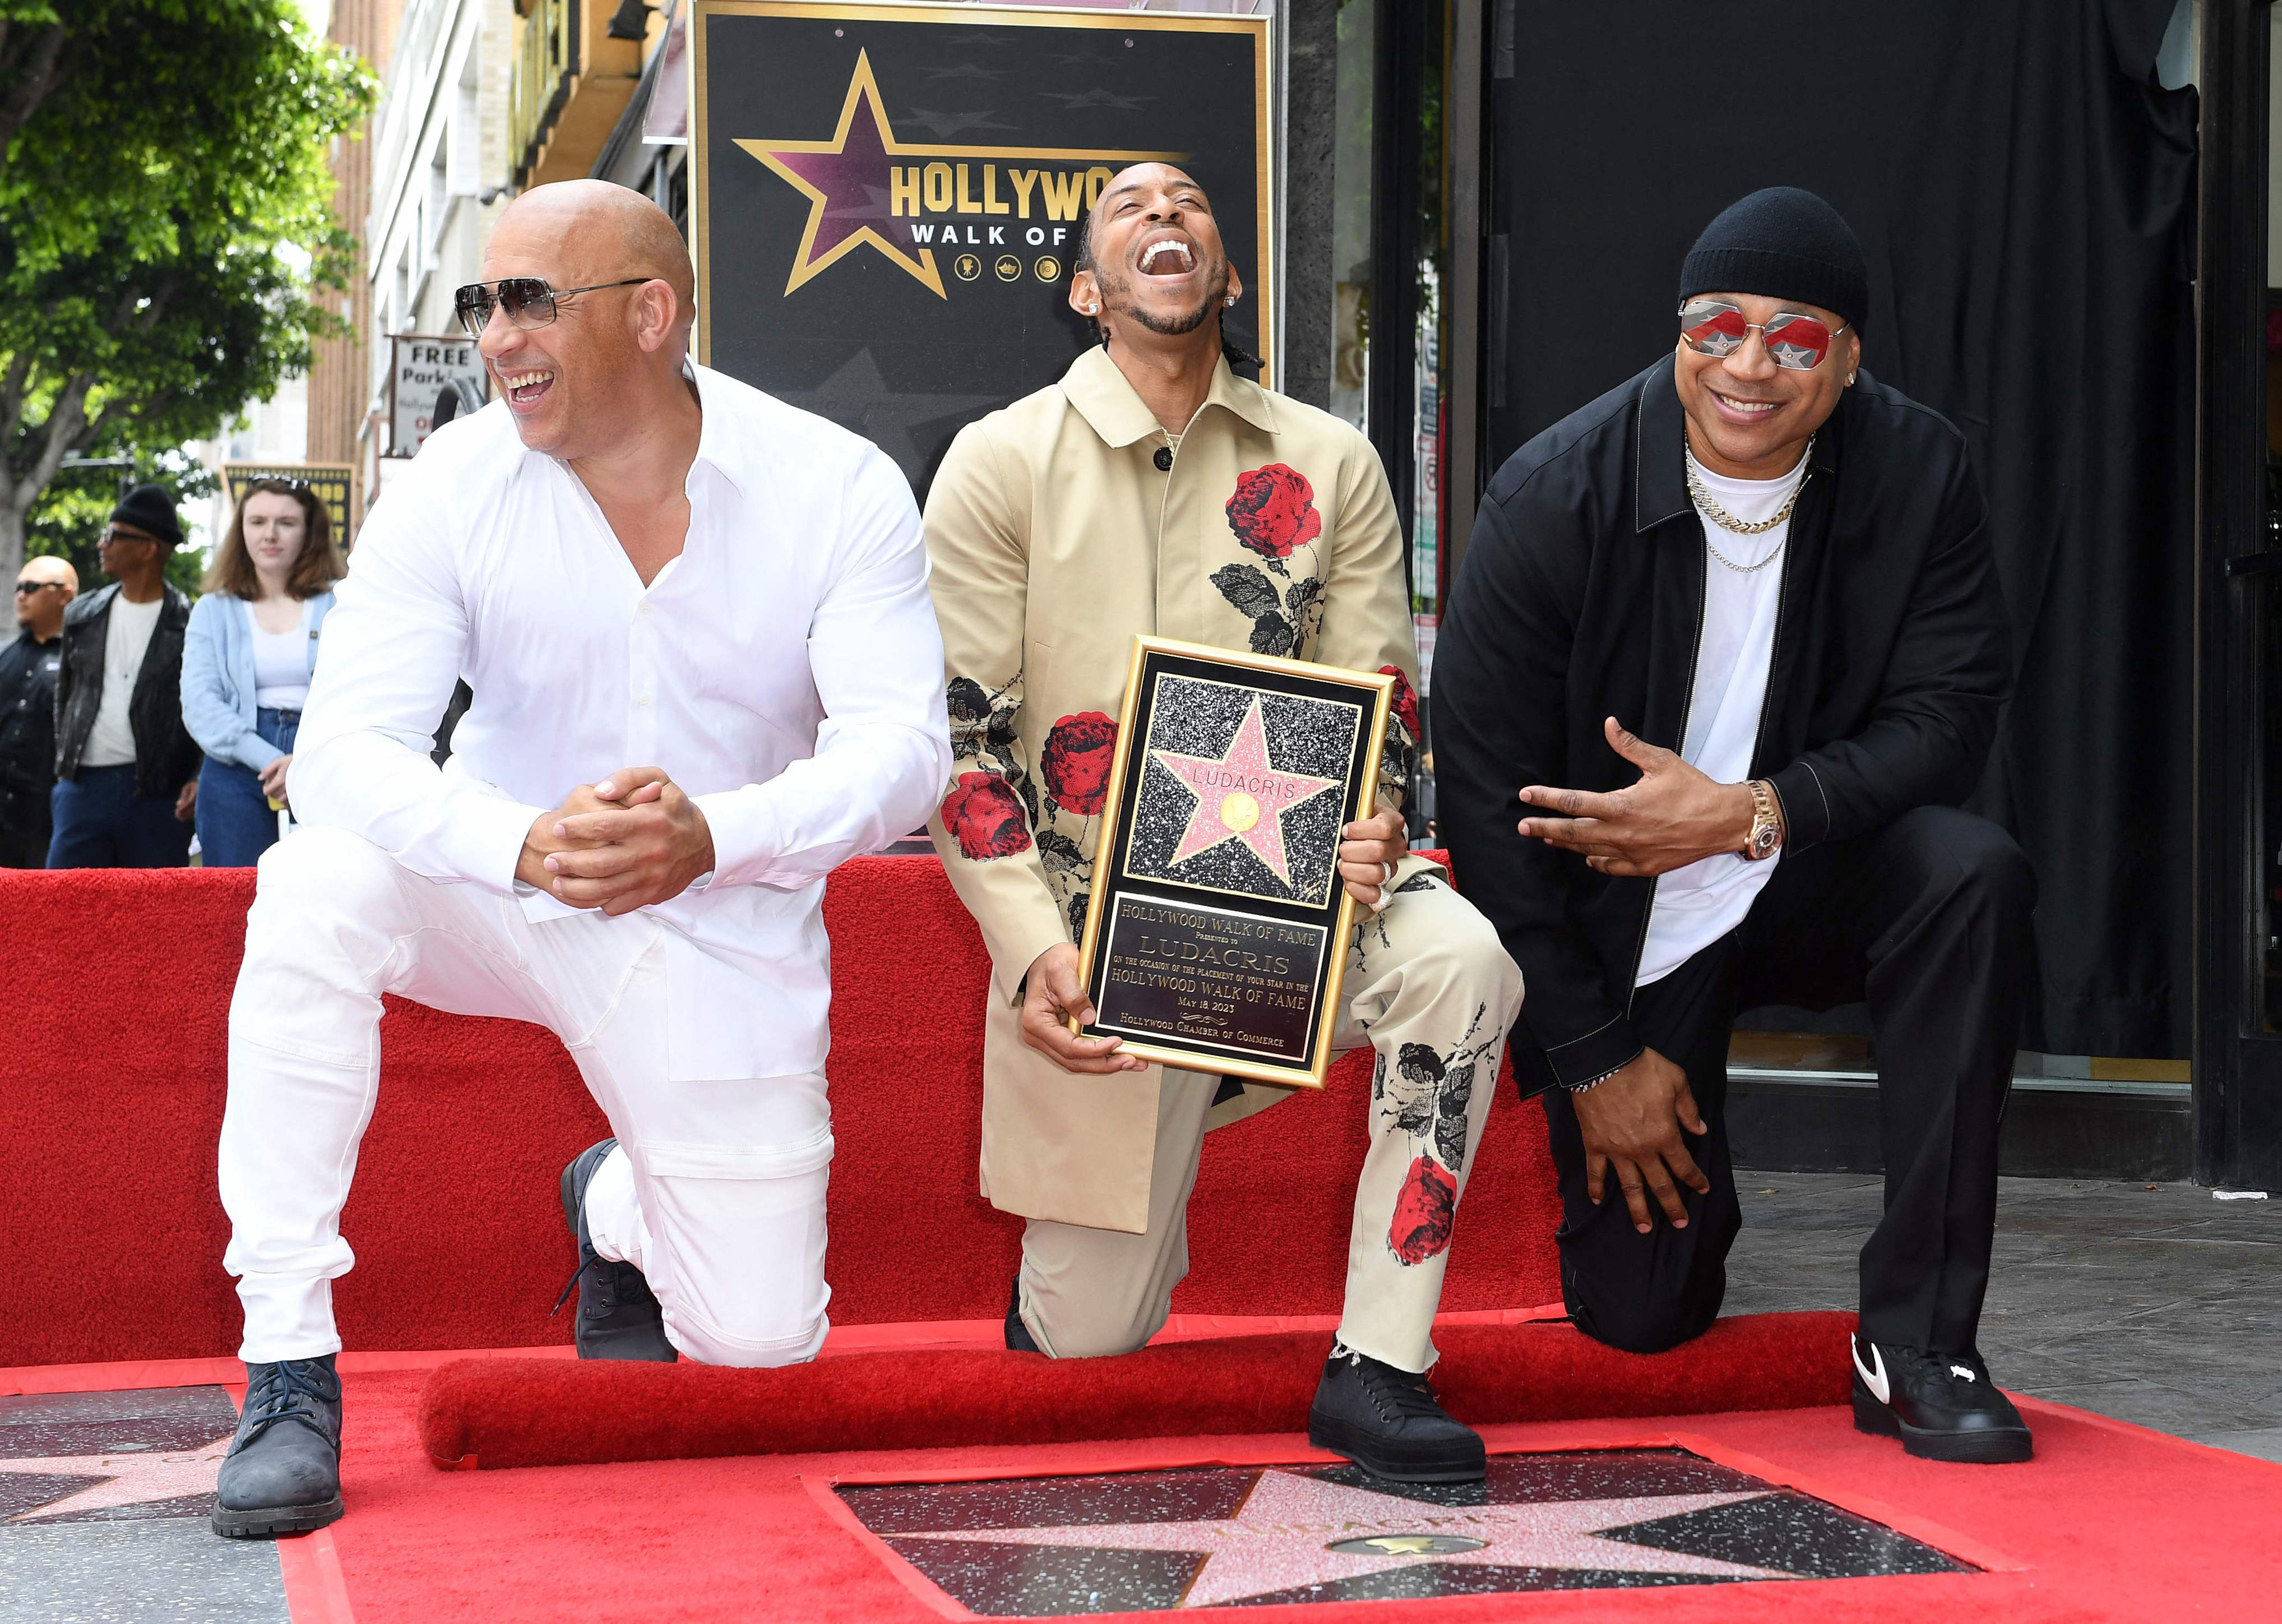 Vin Diesel and LL Cool J laughed with the rapper on the special occasion as he kneeled in front of the star. His daughter Karma surprised him with an introduction before he took the podium to give an acceptance speech. <br> <br> "I'm motivated by legacy and history, as you can see. Today, this means that I've made my mark. That's how I feel," Ludacris said. "Being amongst these names is amazing to me."